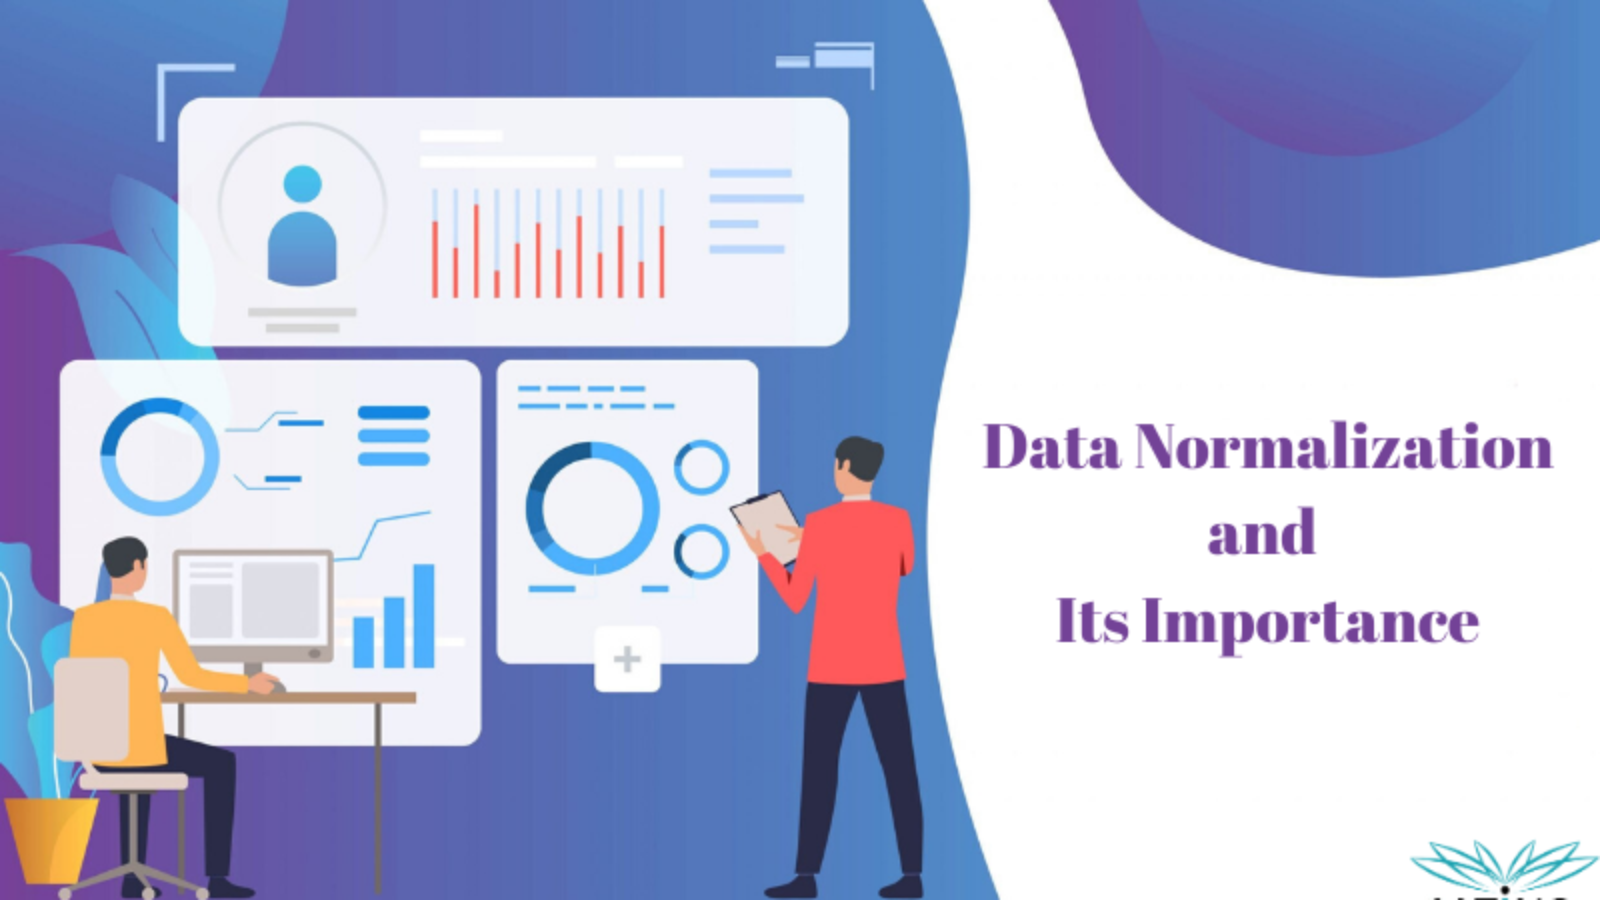 Data Normalization and Its Importance